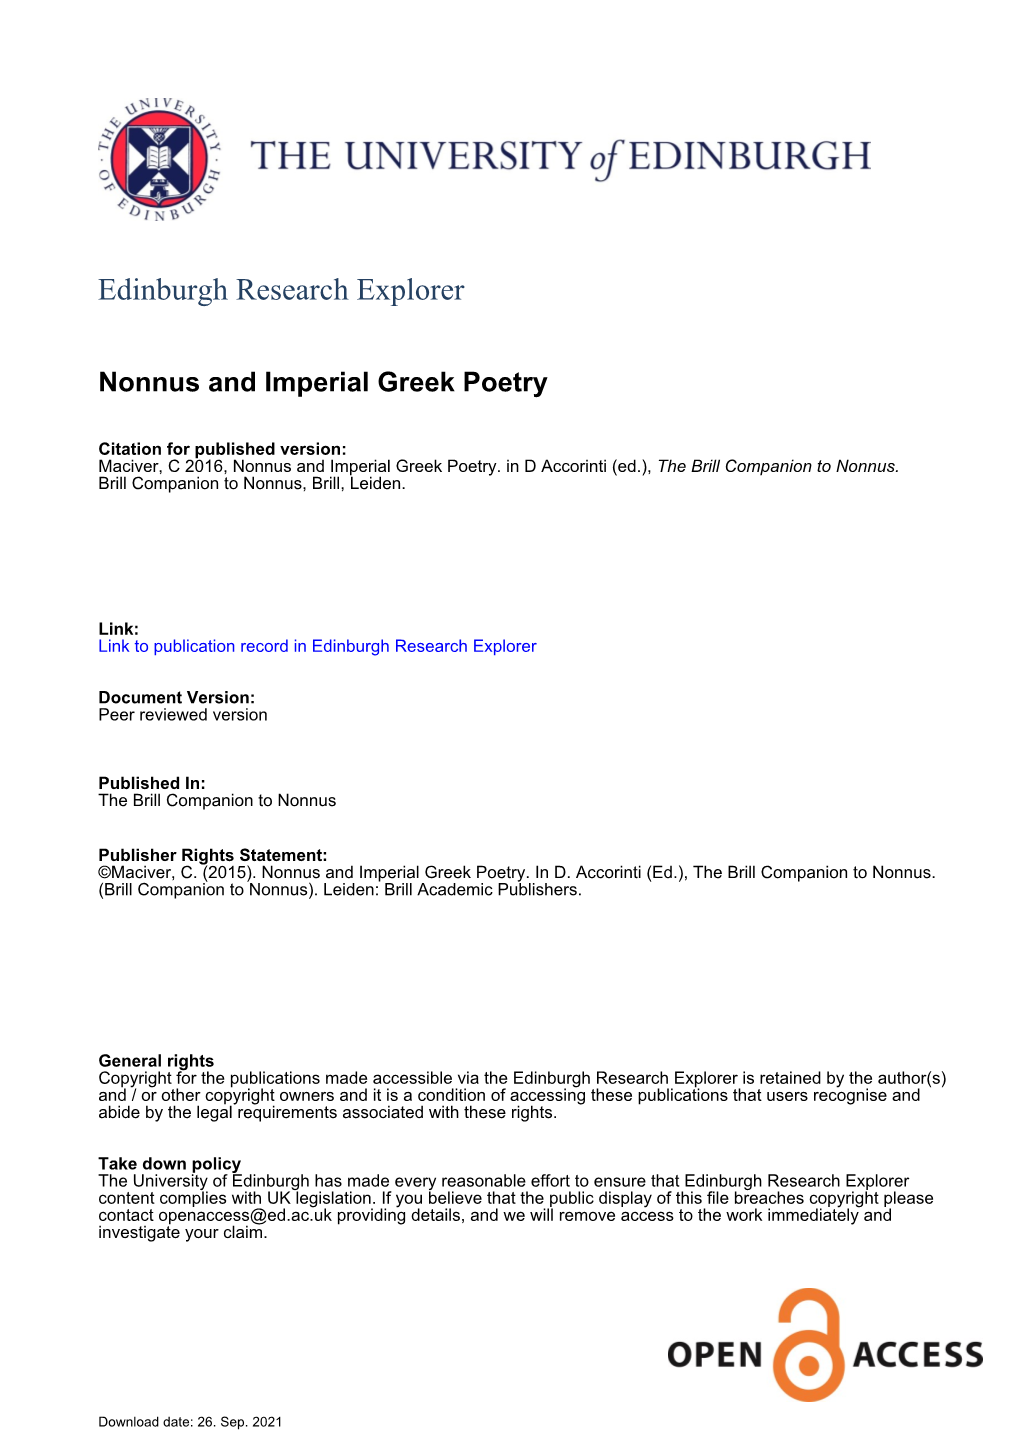 Nonnus and Imperial Greek Poetry